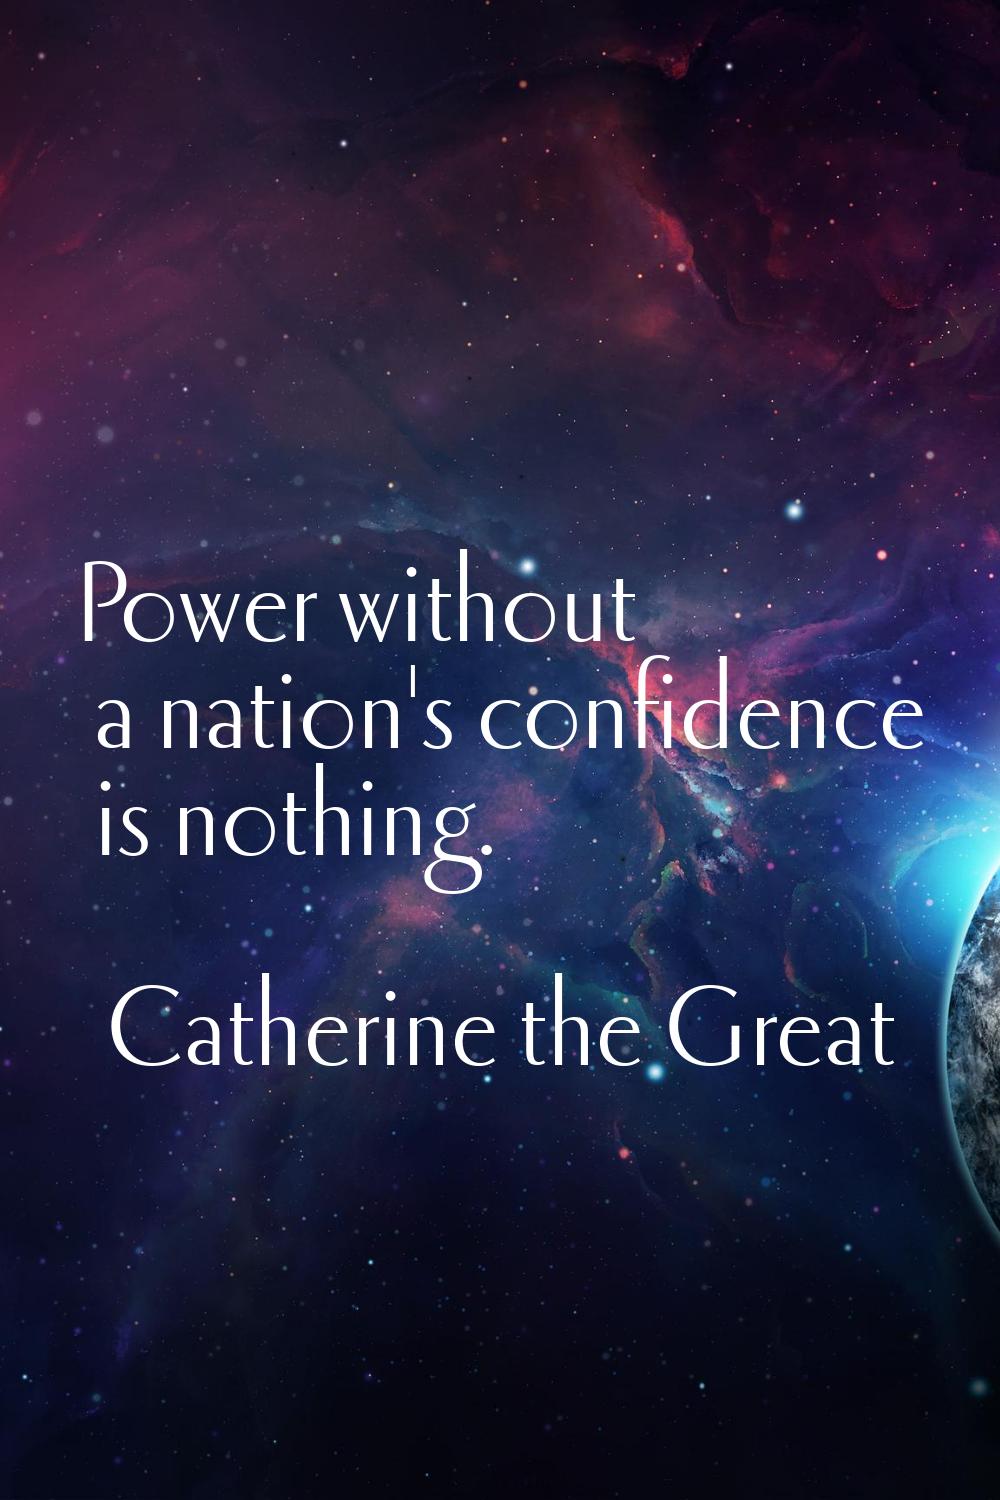 Power without a nation's confidence is nothing.